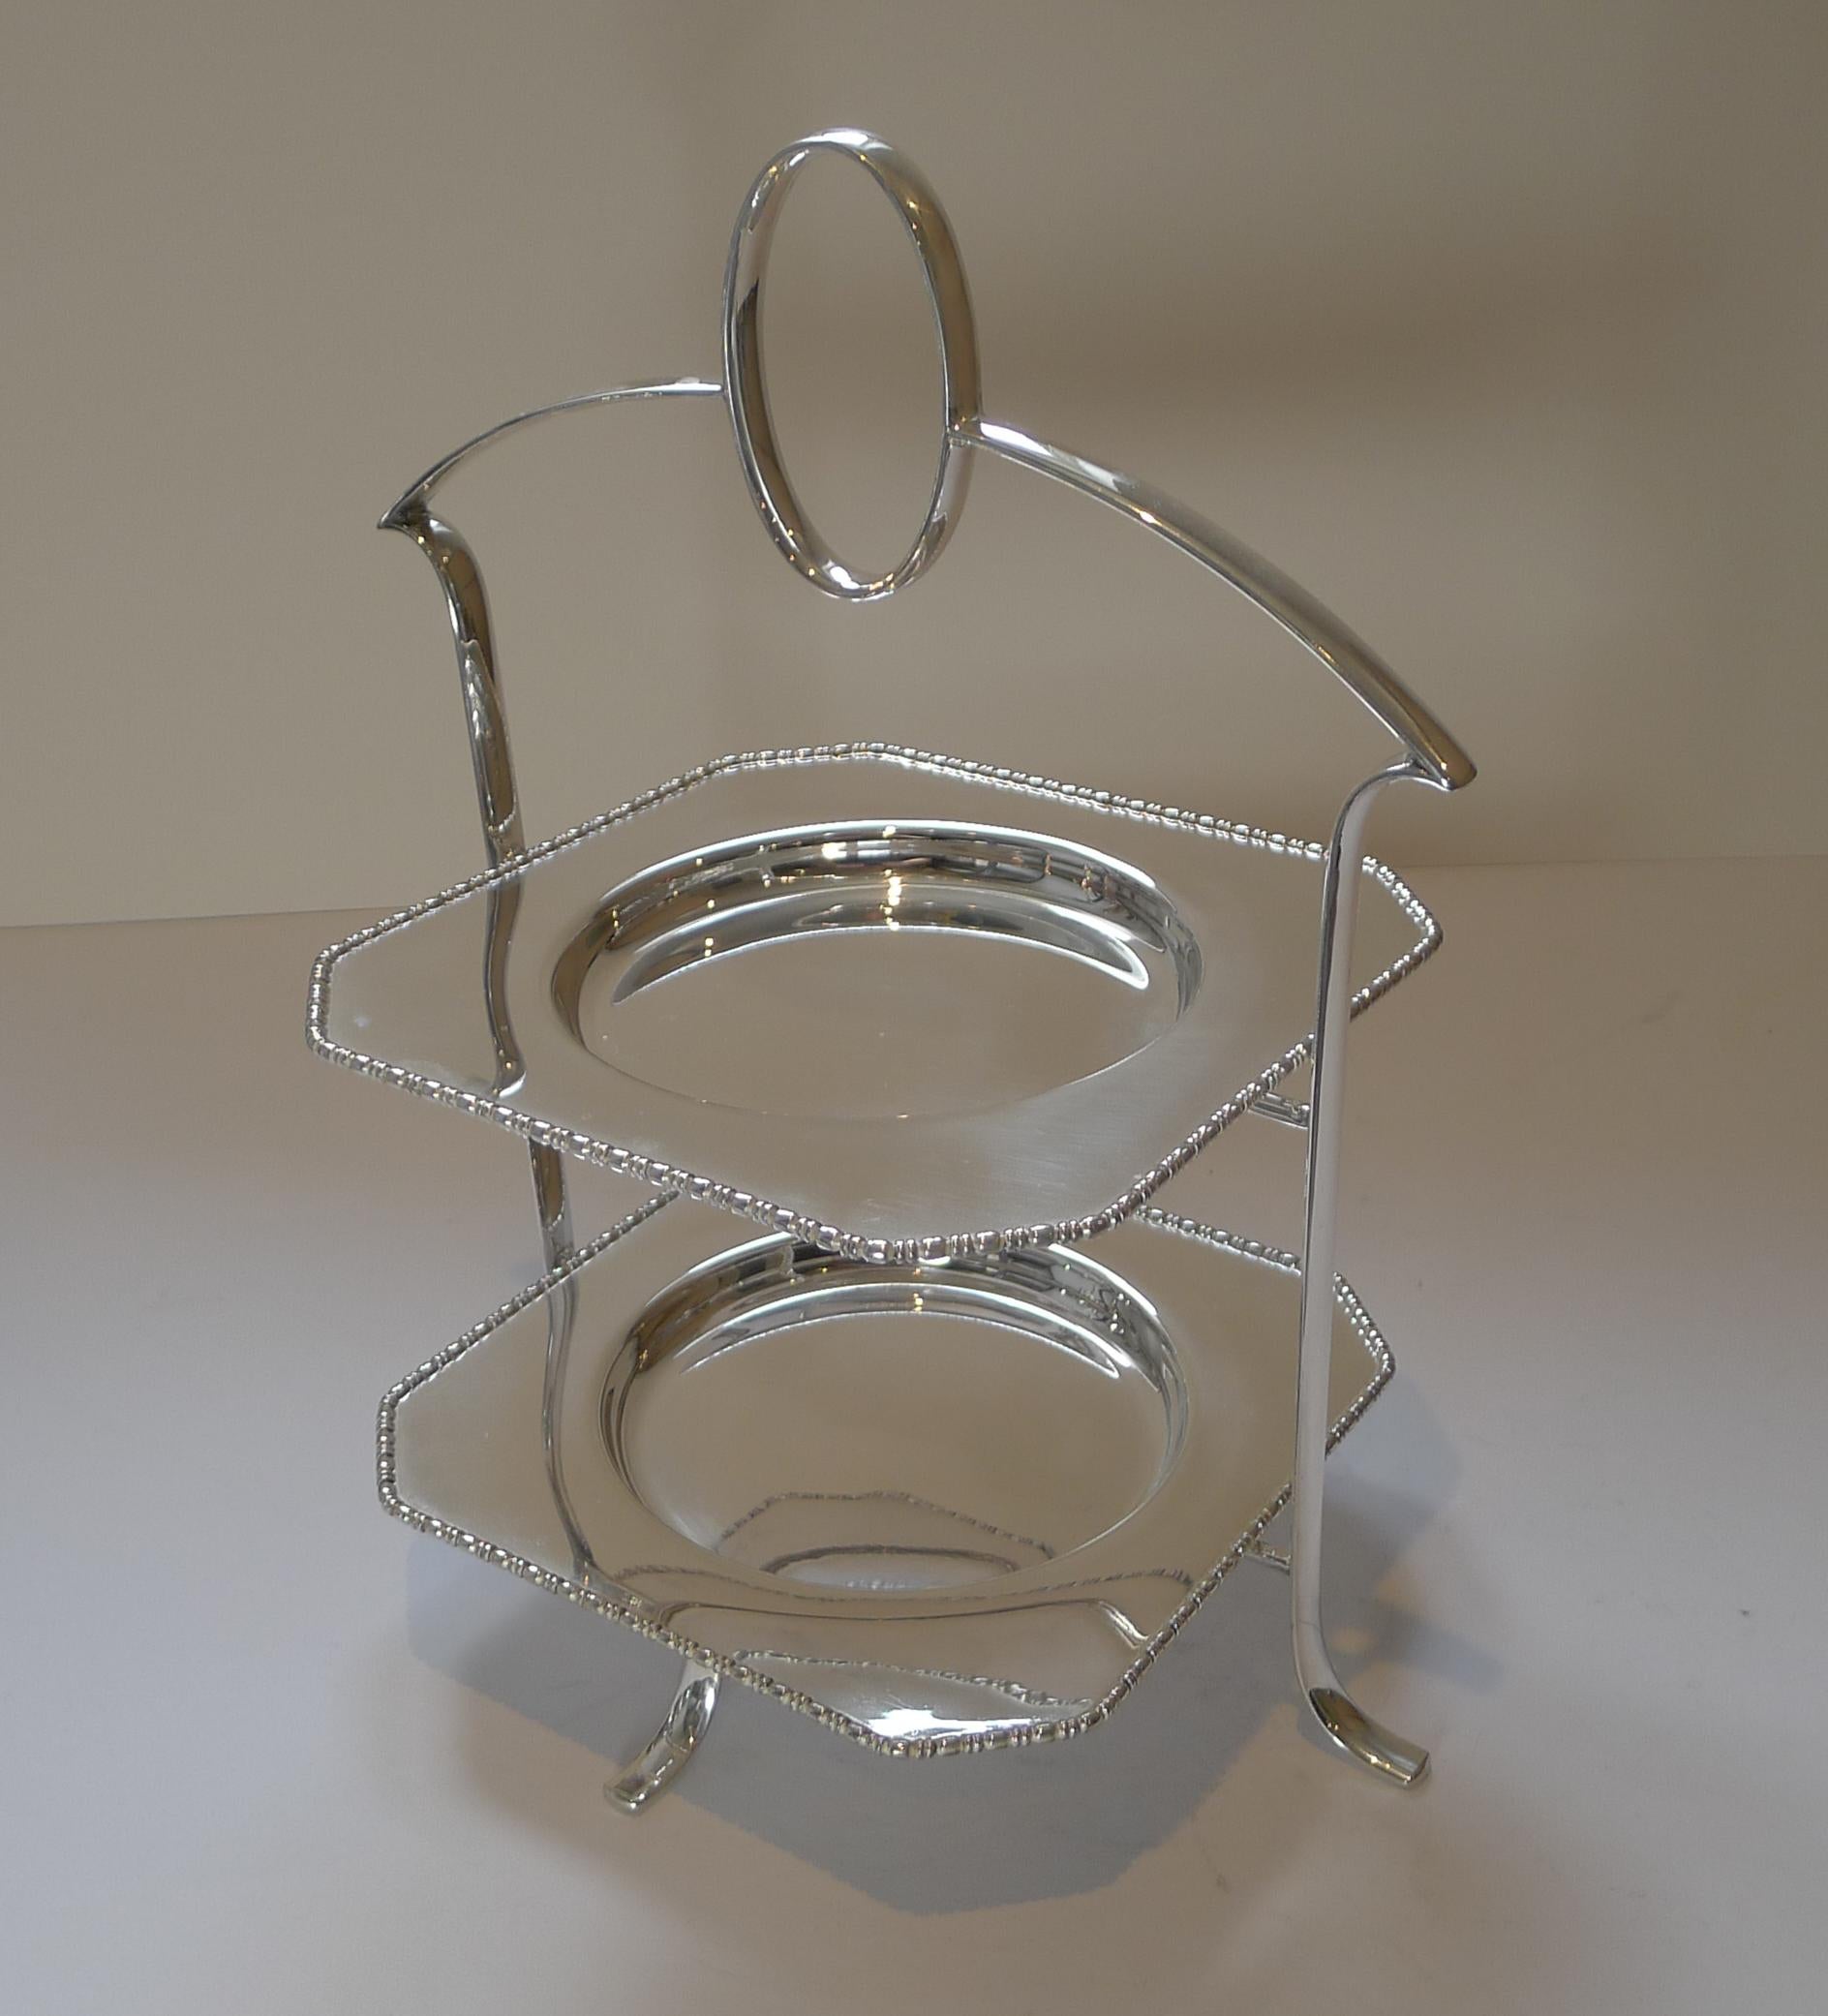 A stylish antique English cake stand in silver plate by top-notch silversmith, Deakin and Francis. 

A beautifully shaped frame with integral handle is complimented by two square cake plates, each with a lovely raised border.

Excellent